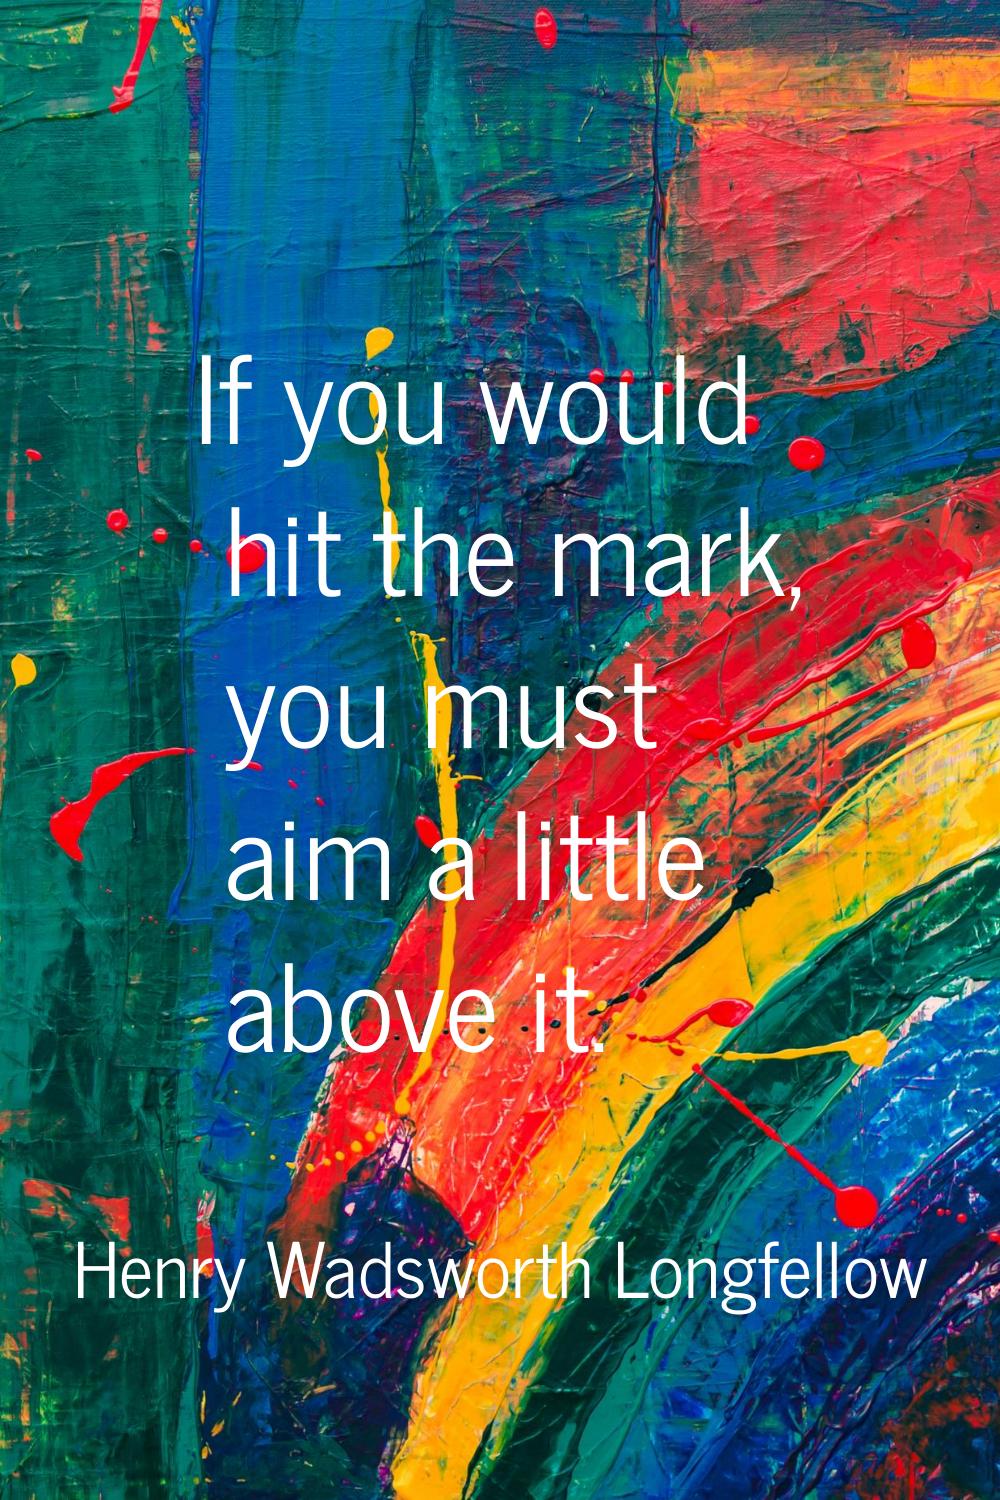 If you would hit the mark, you must aim a little above it.